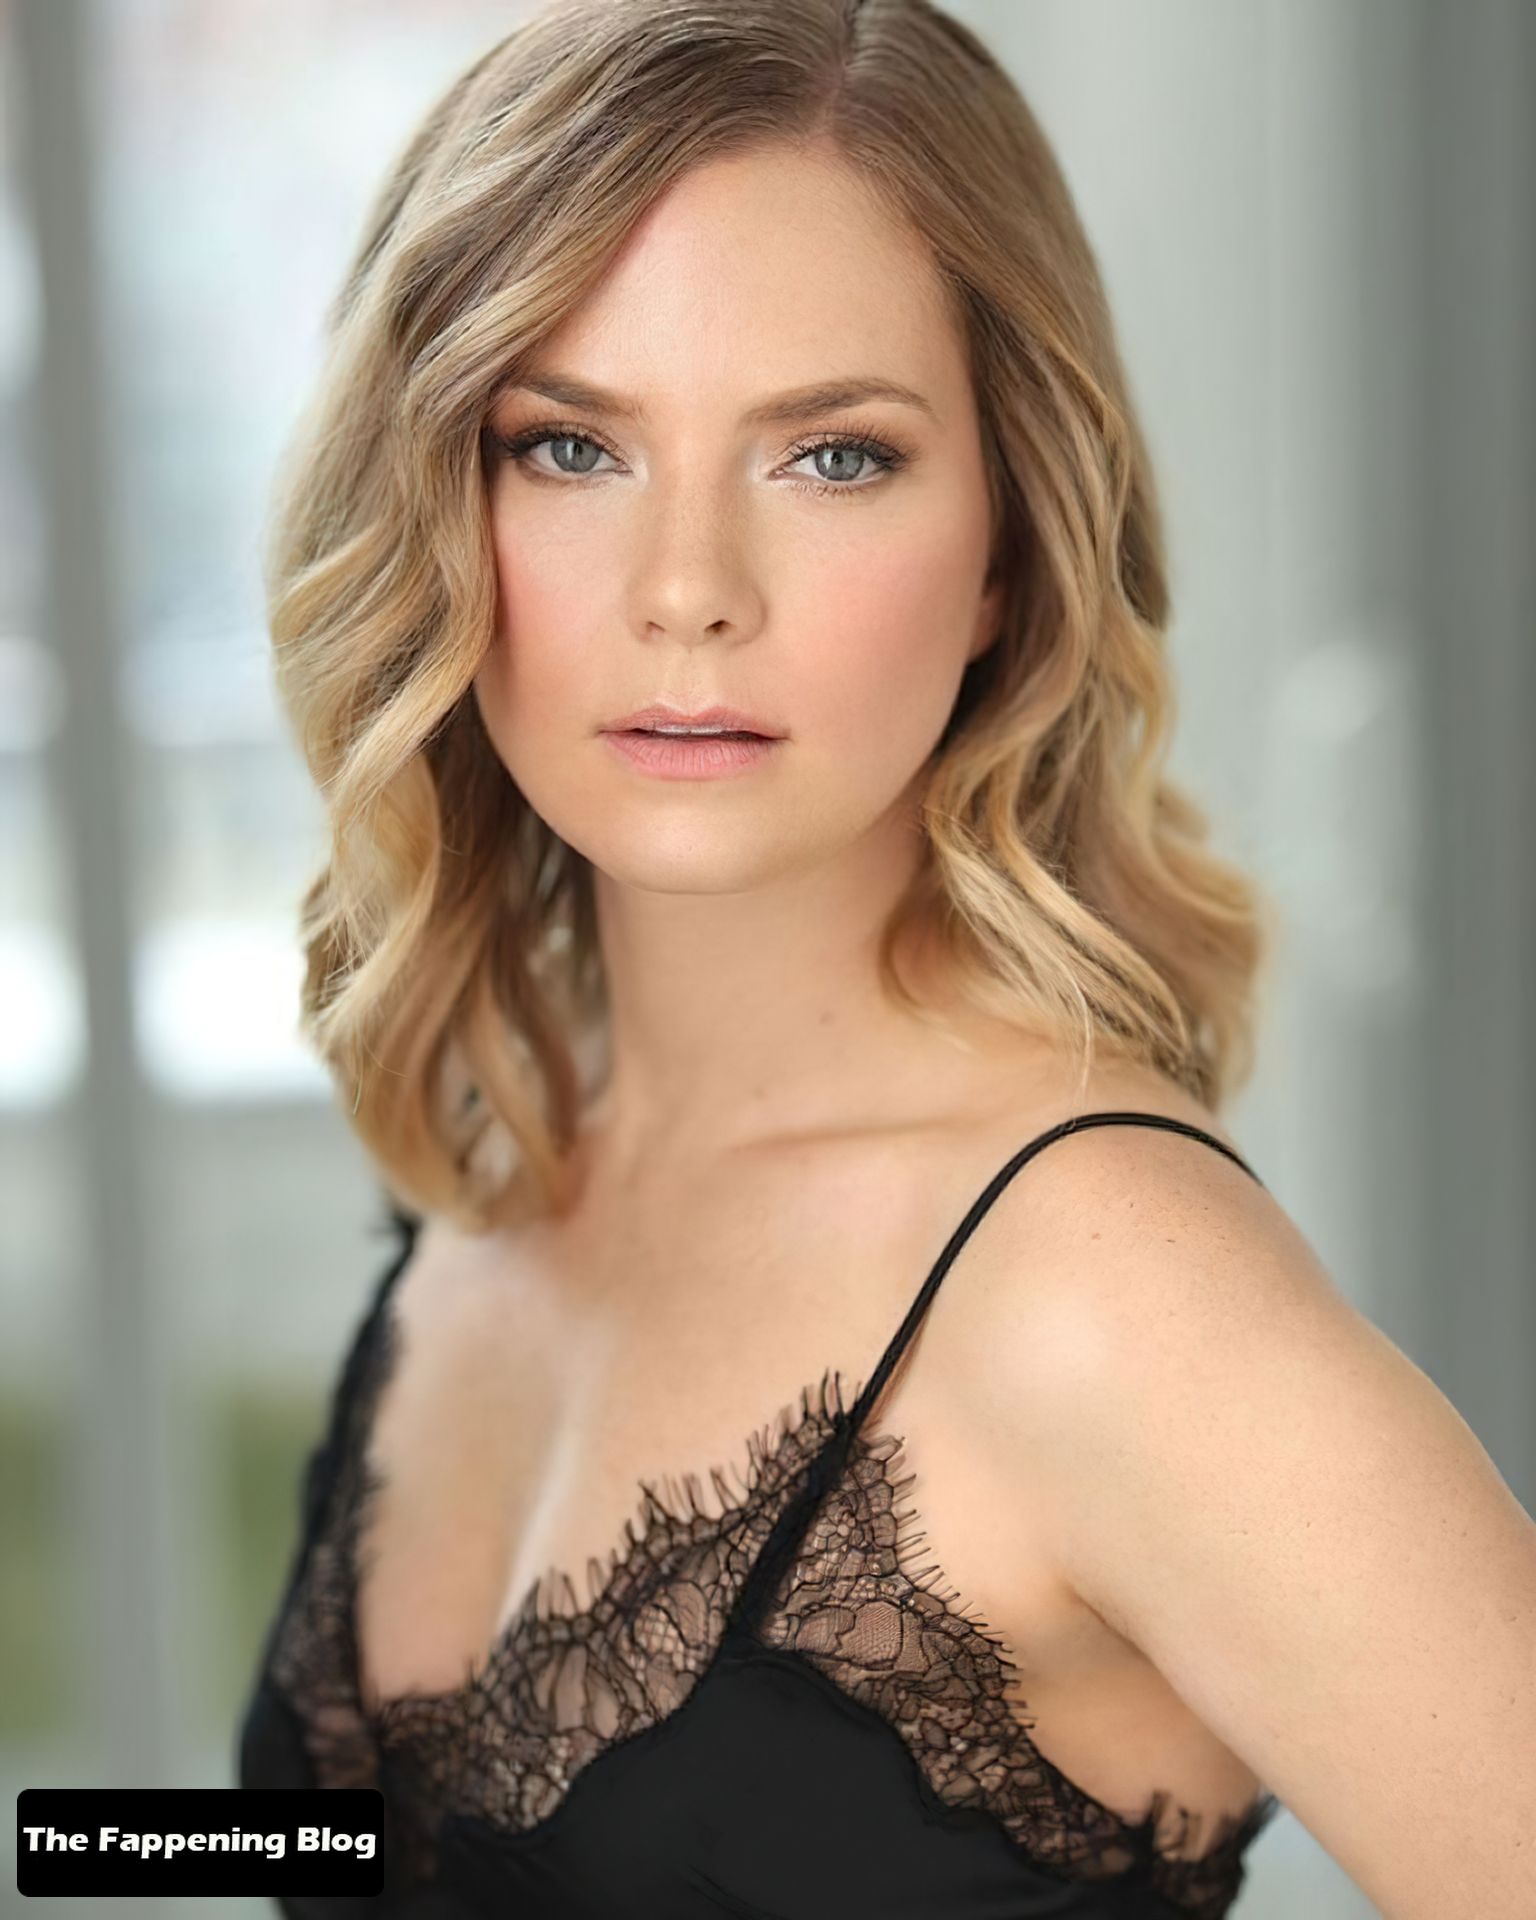 Cindy-Busby-Sexy-Photo-Collection-1-thefappeningblog.com.jpg.